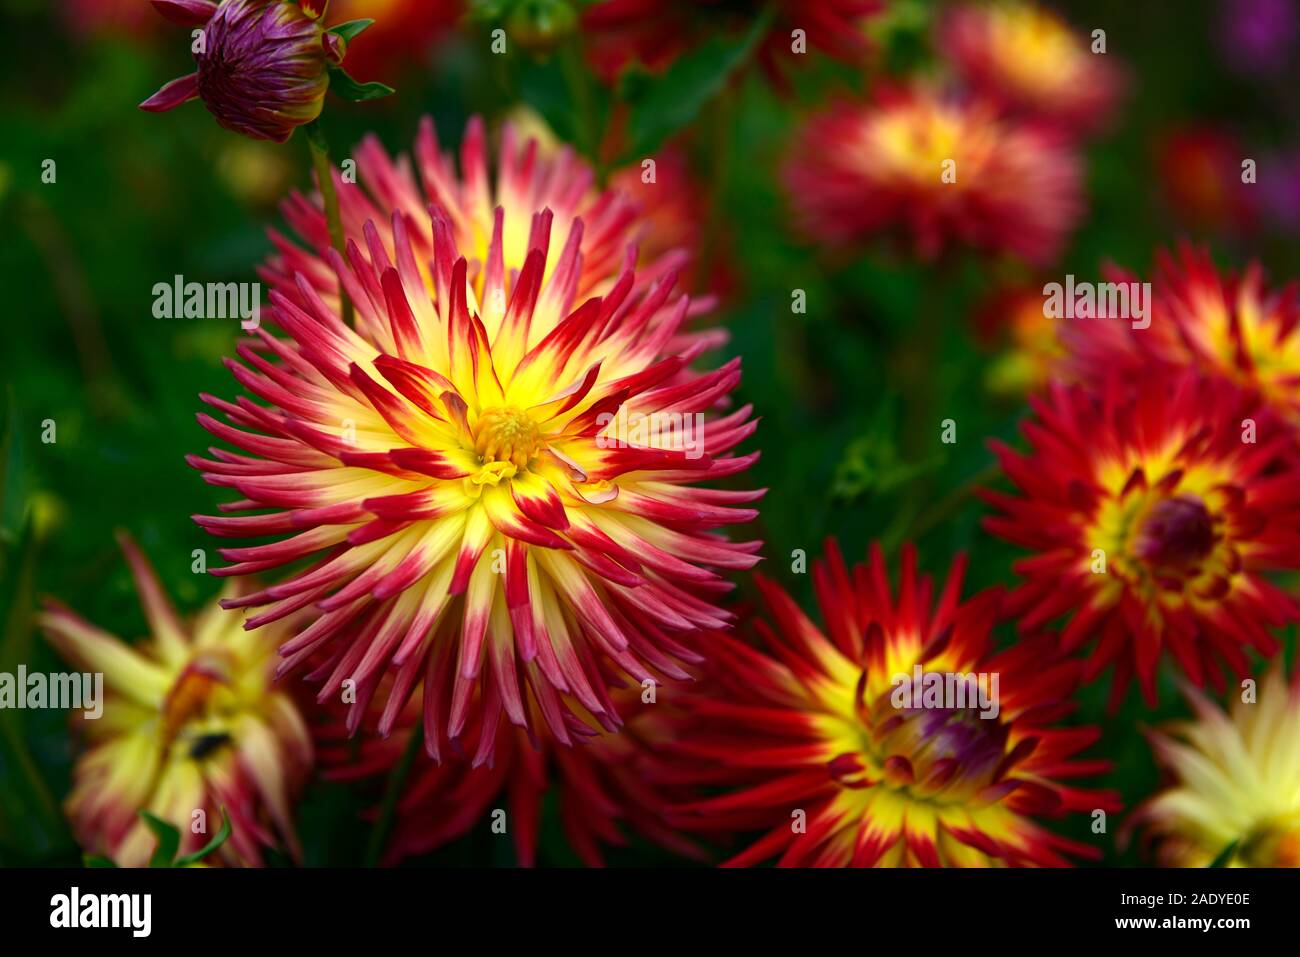 dahlia weston spanish dancer,small cactus,yellow red tipped,flower,flowers,flowering,dahlias,perennial tuber,tuberous plant,RM Floral Stock Photo